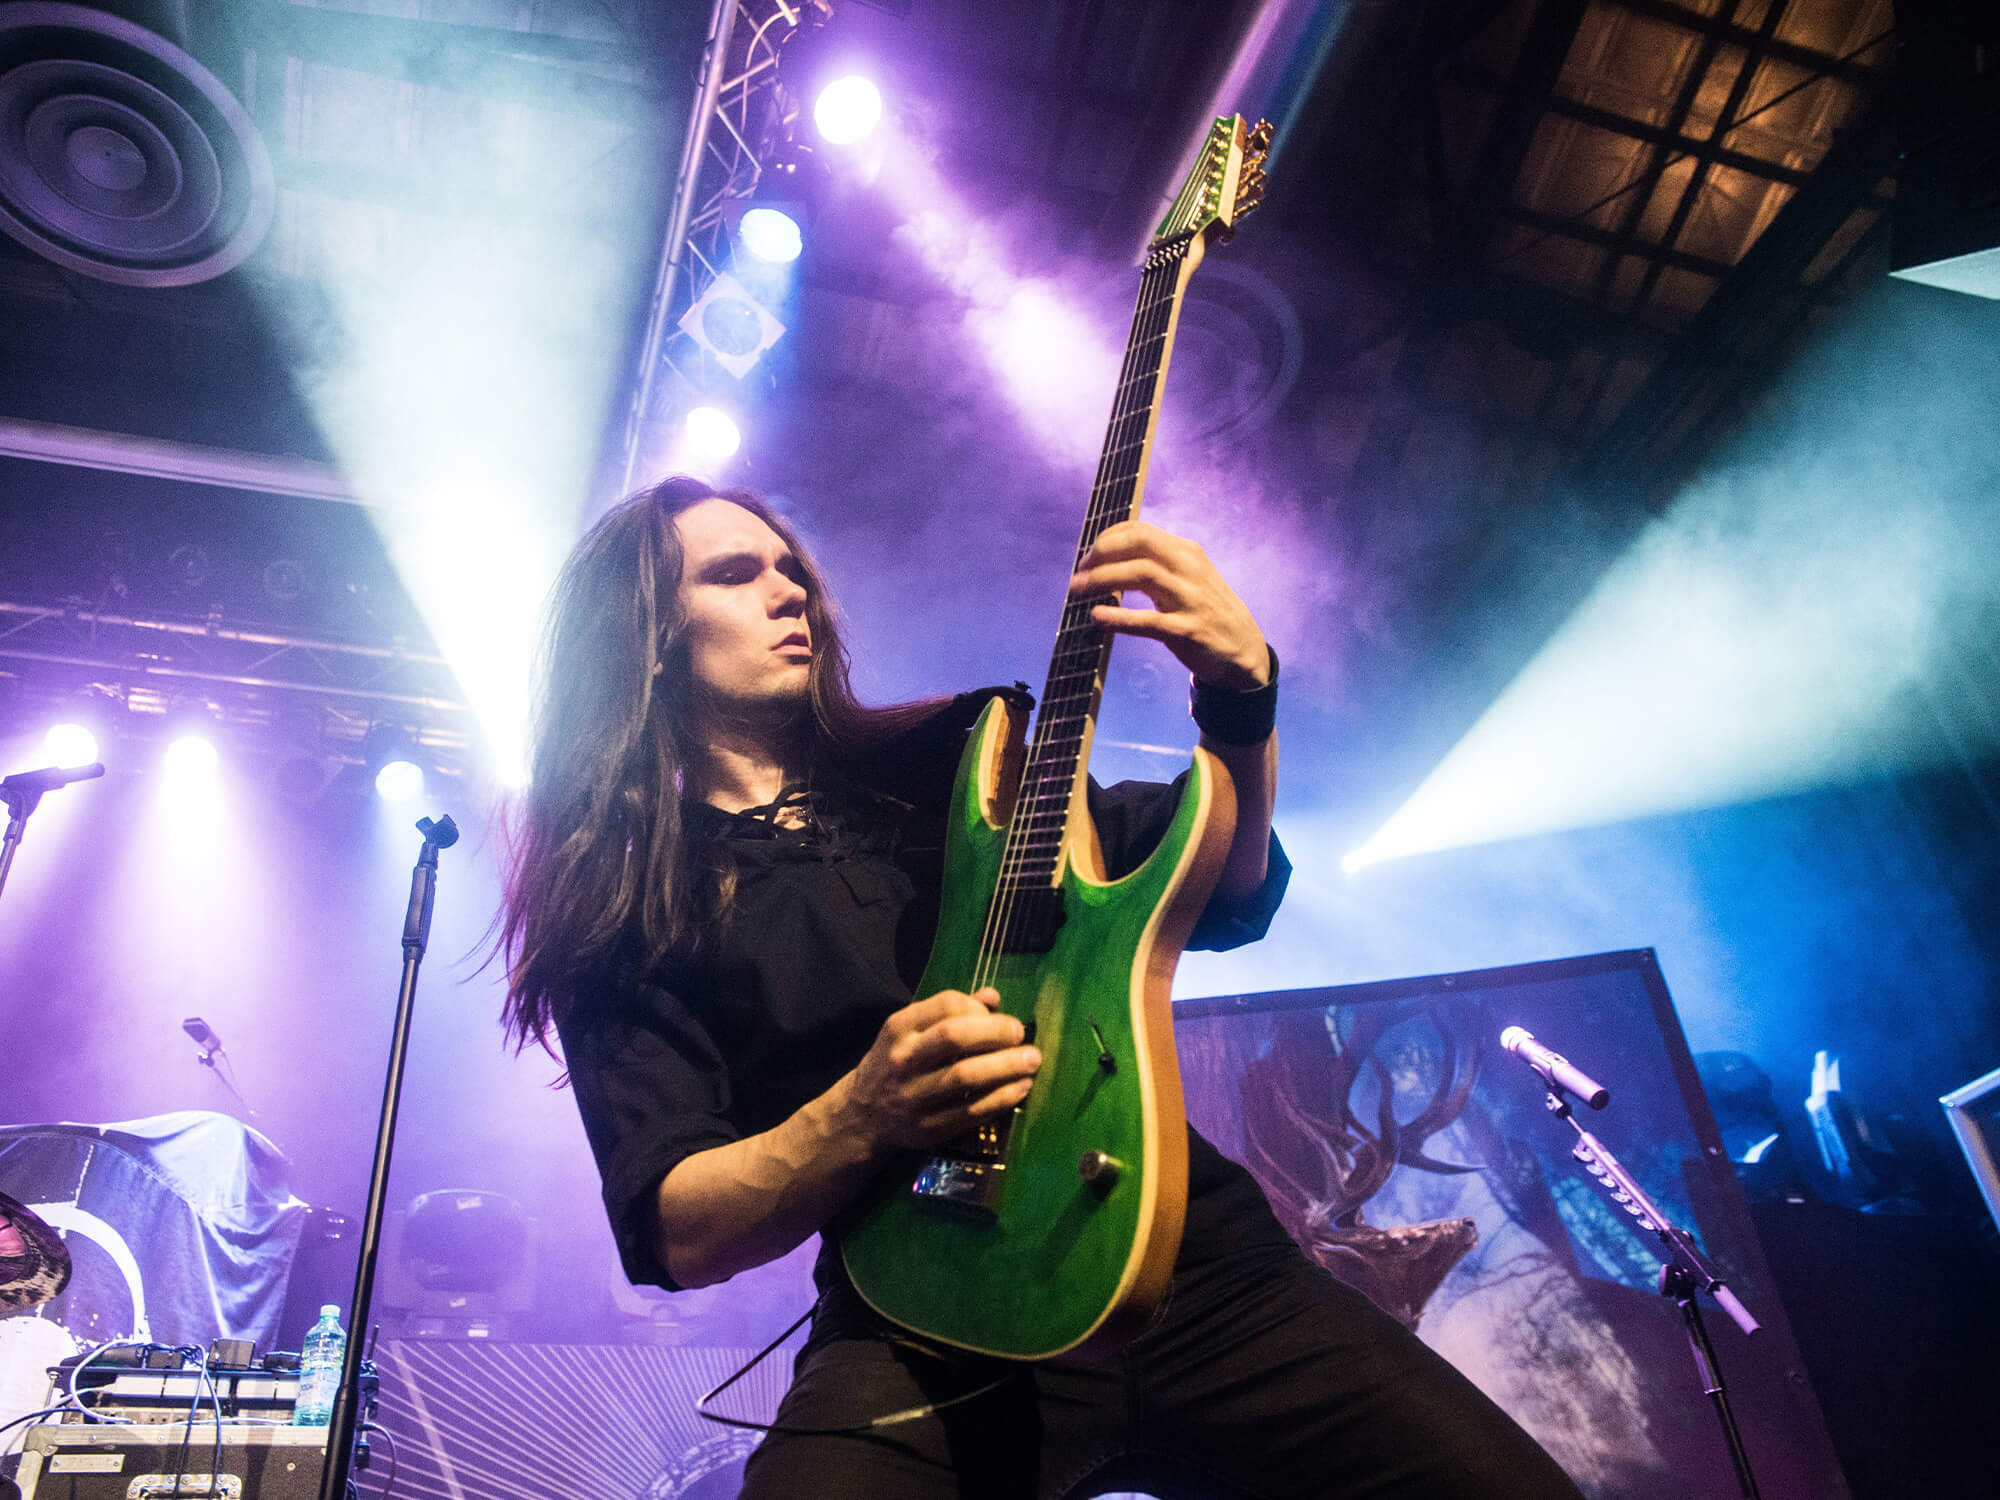 Teemu Mäntysaari on stage in 2018. He's playing a bright green electric guitar which he is holding upright.